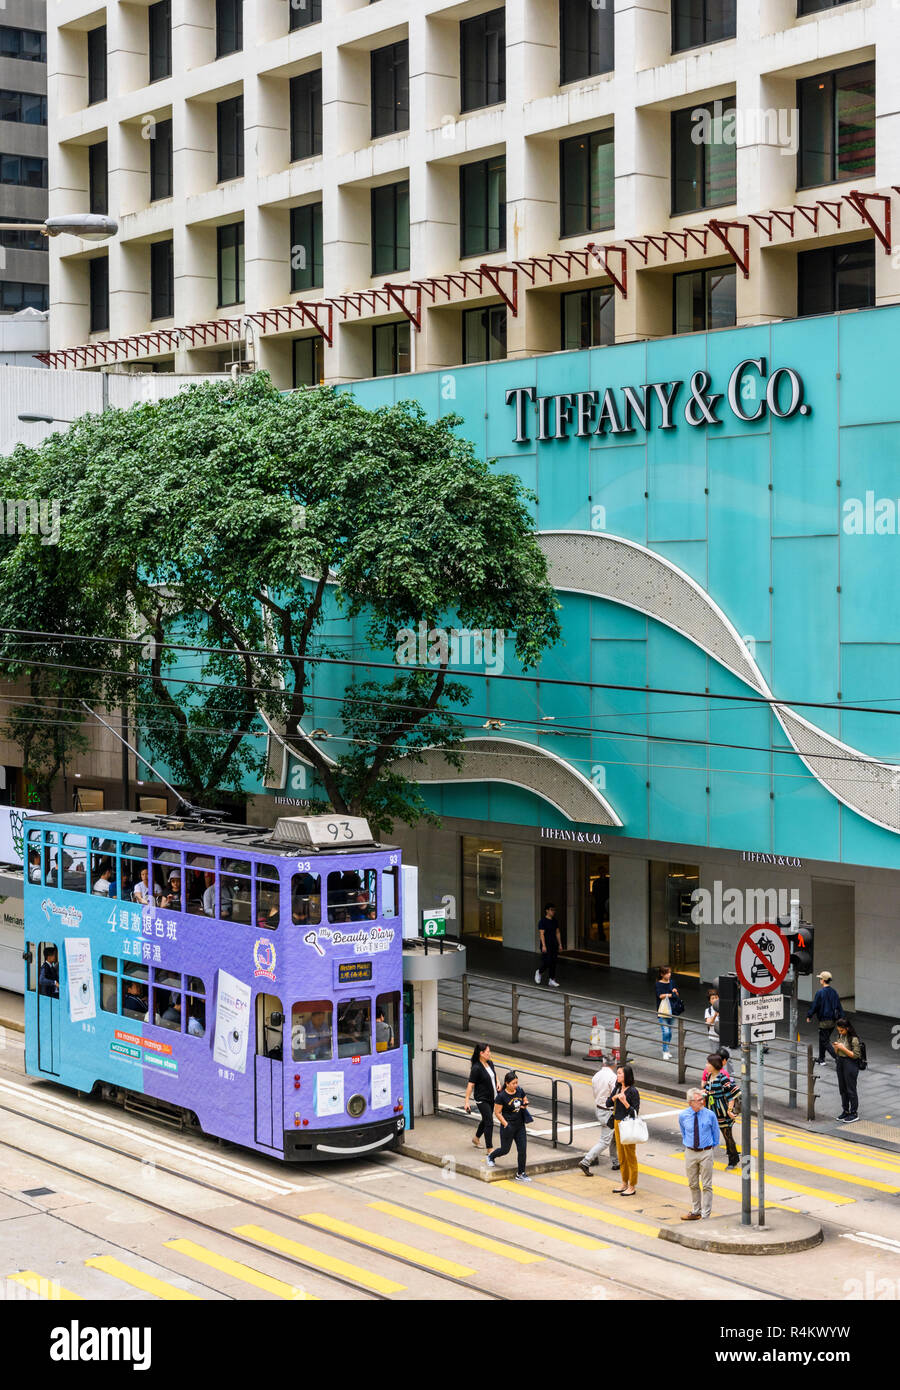 A tram outside the luxury shops along Des Voeux Rd, Central, Hong Kong Stock Photo